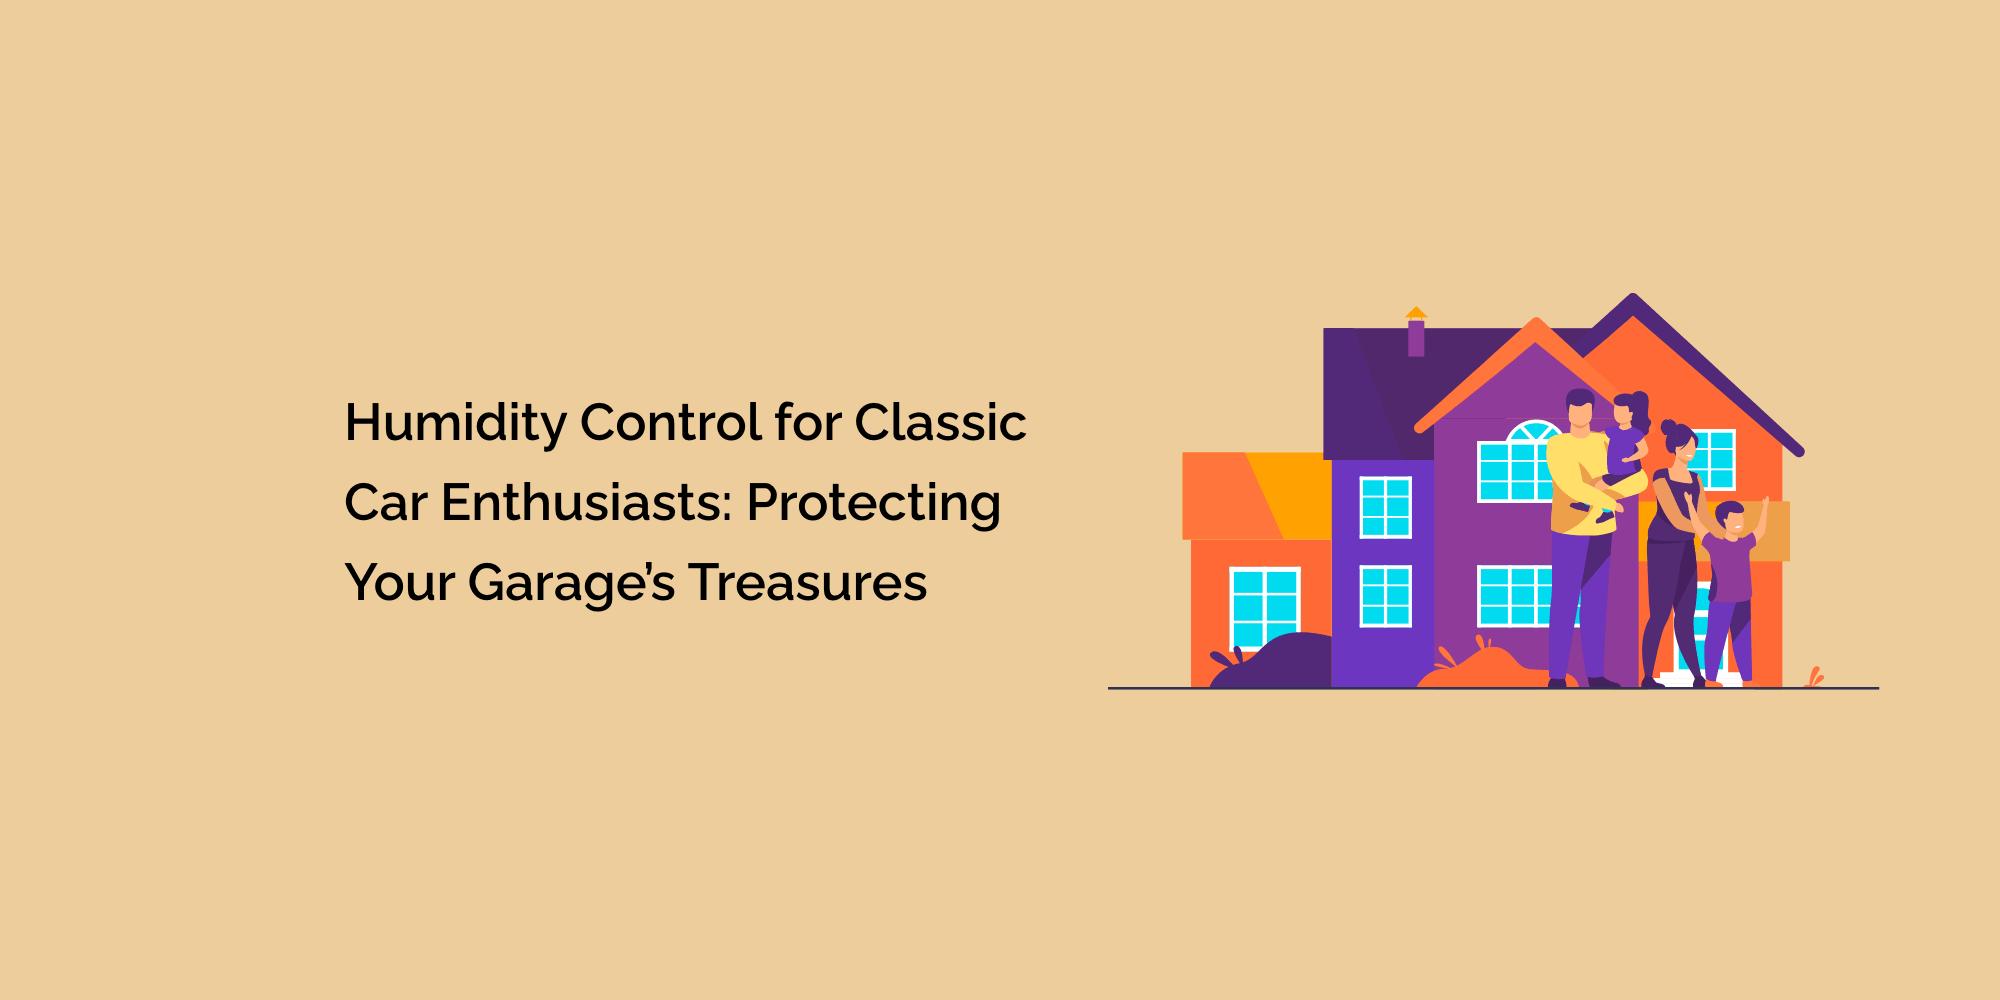 Humidity Control for Classic Car Enthusiasts: Protecting Your Garage's Treasures